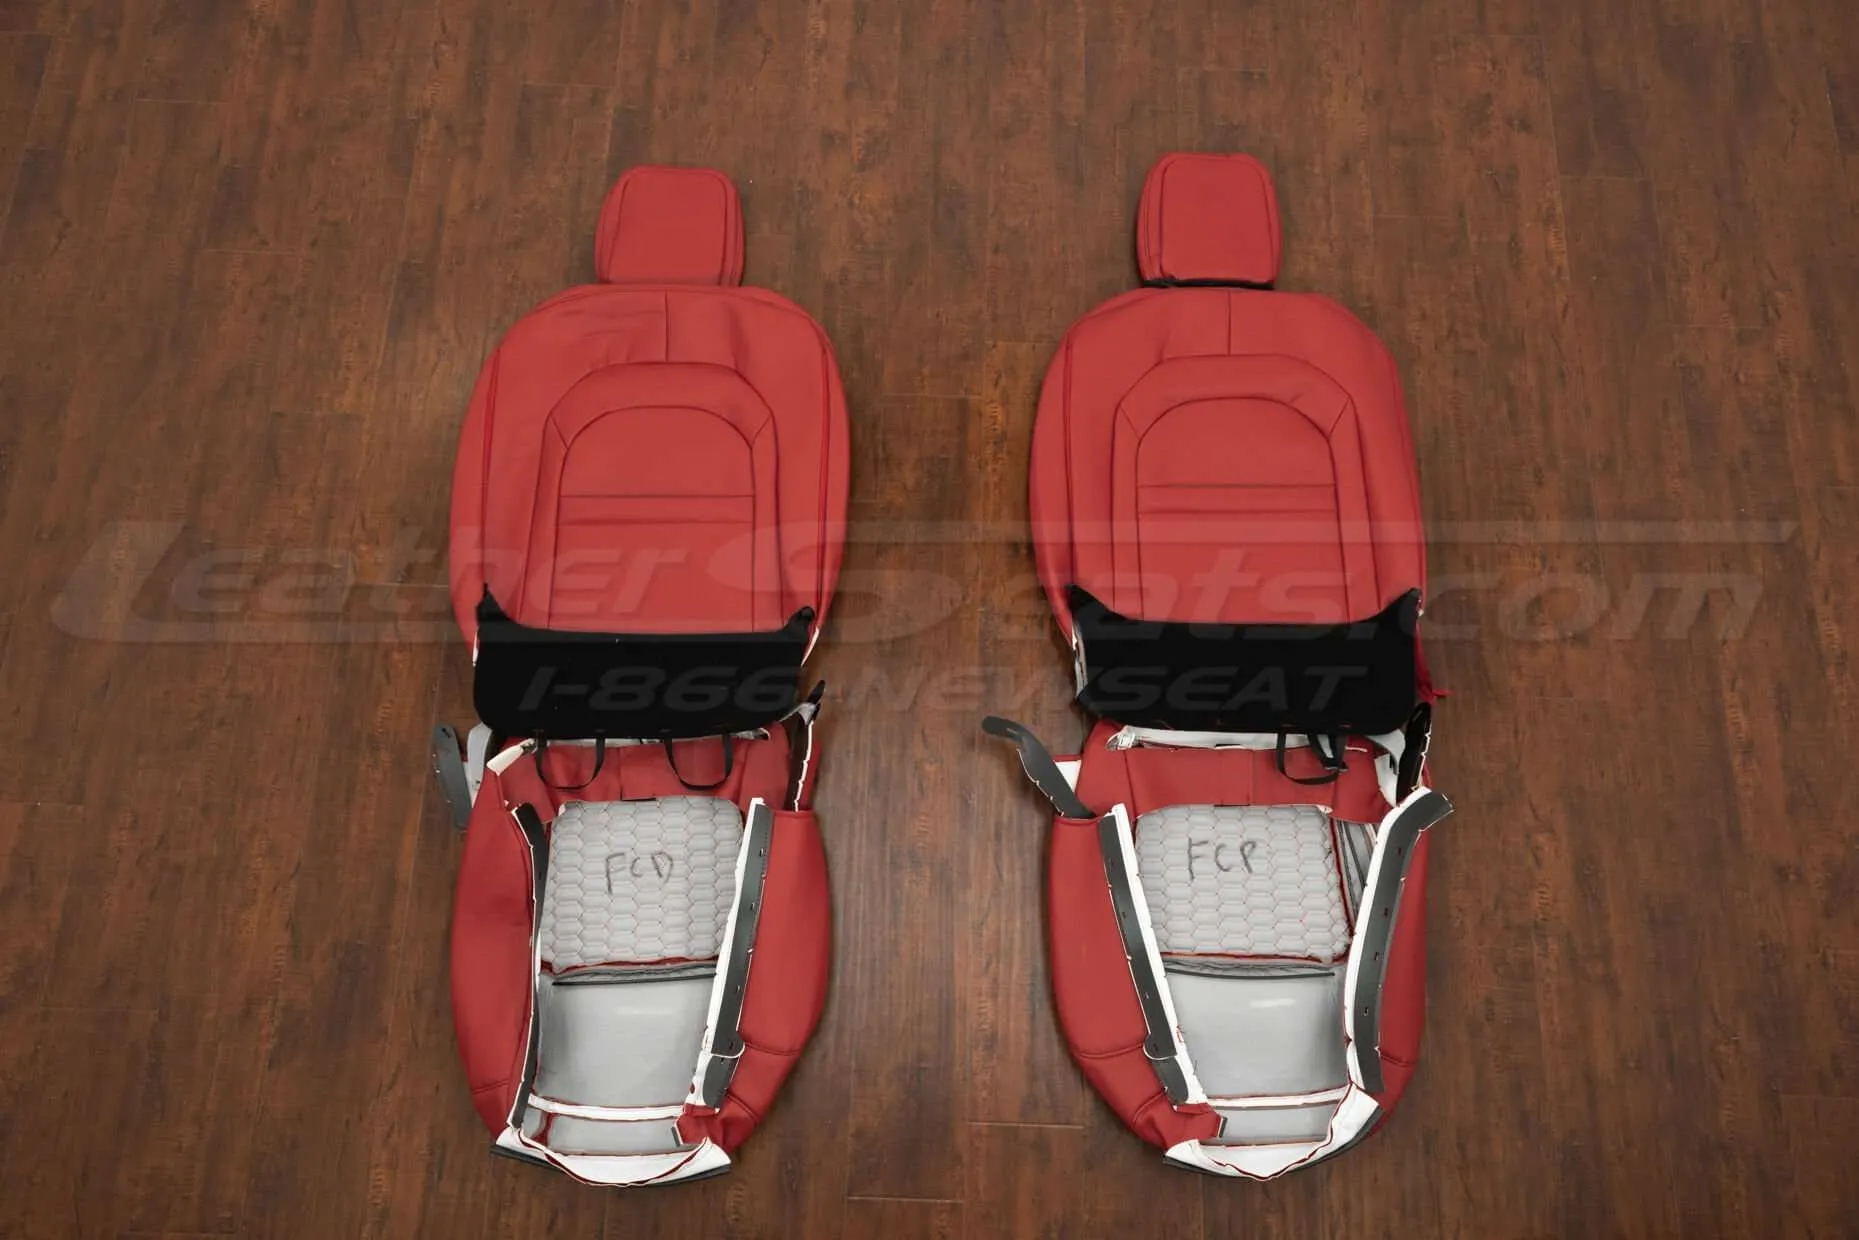 Back view of front seats